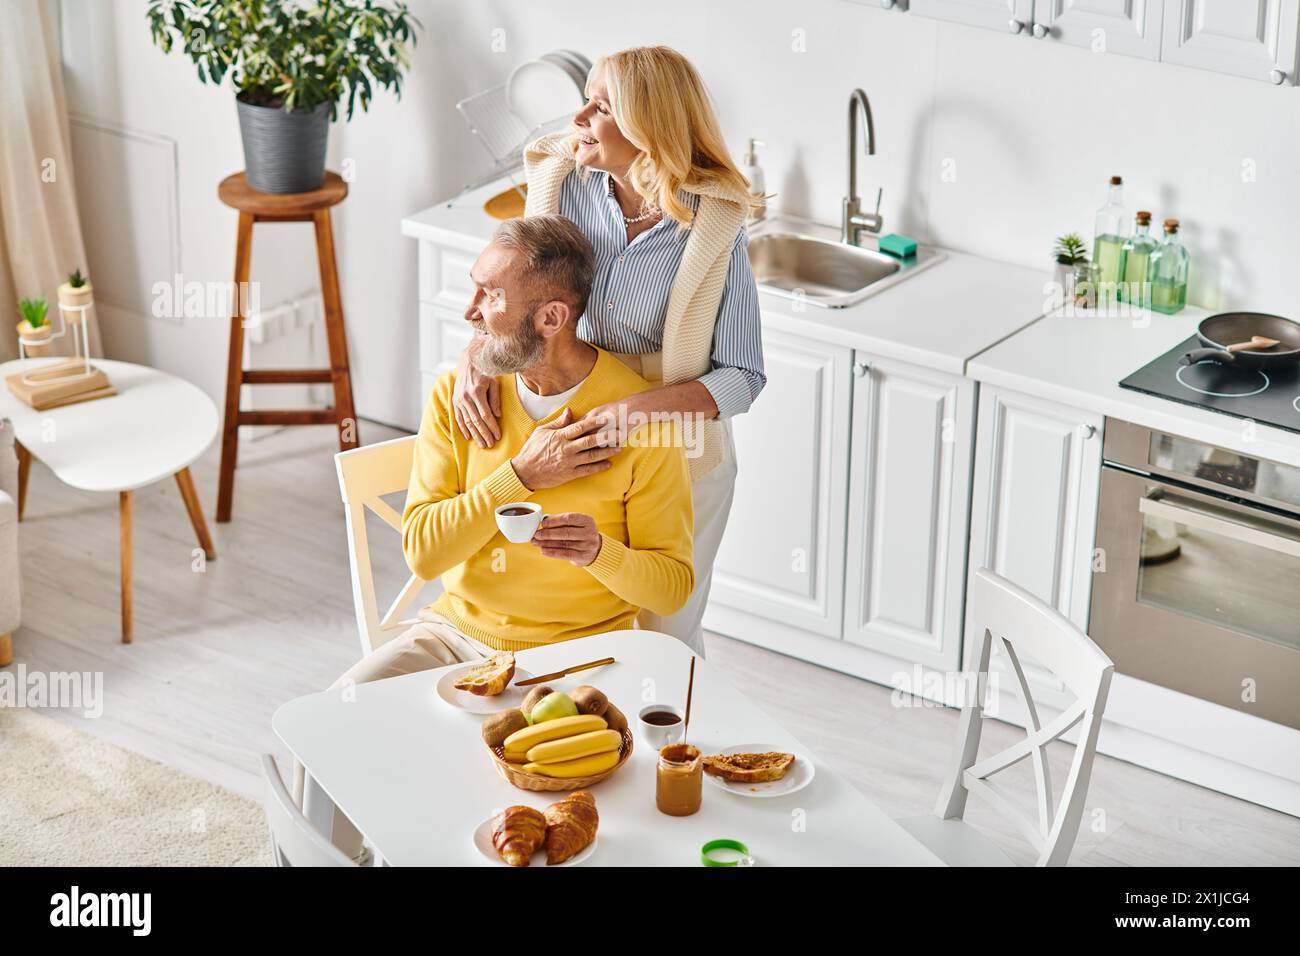 A man and a woman, a mature loving couple, sitting in chairs together, enjoying each others company in cozy homewear at home. Stock Photo